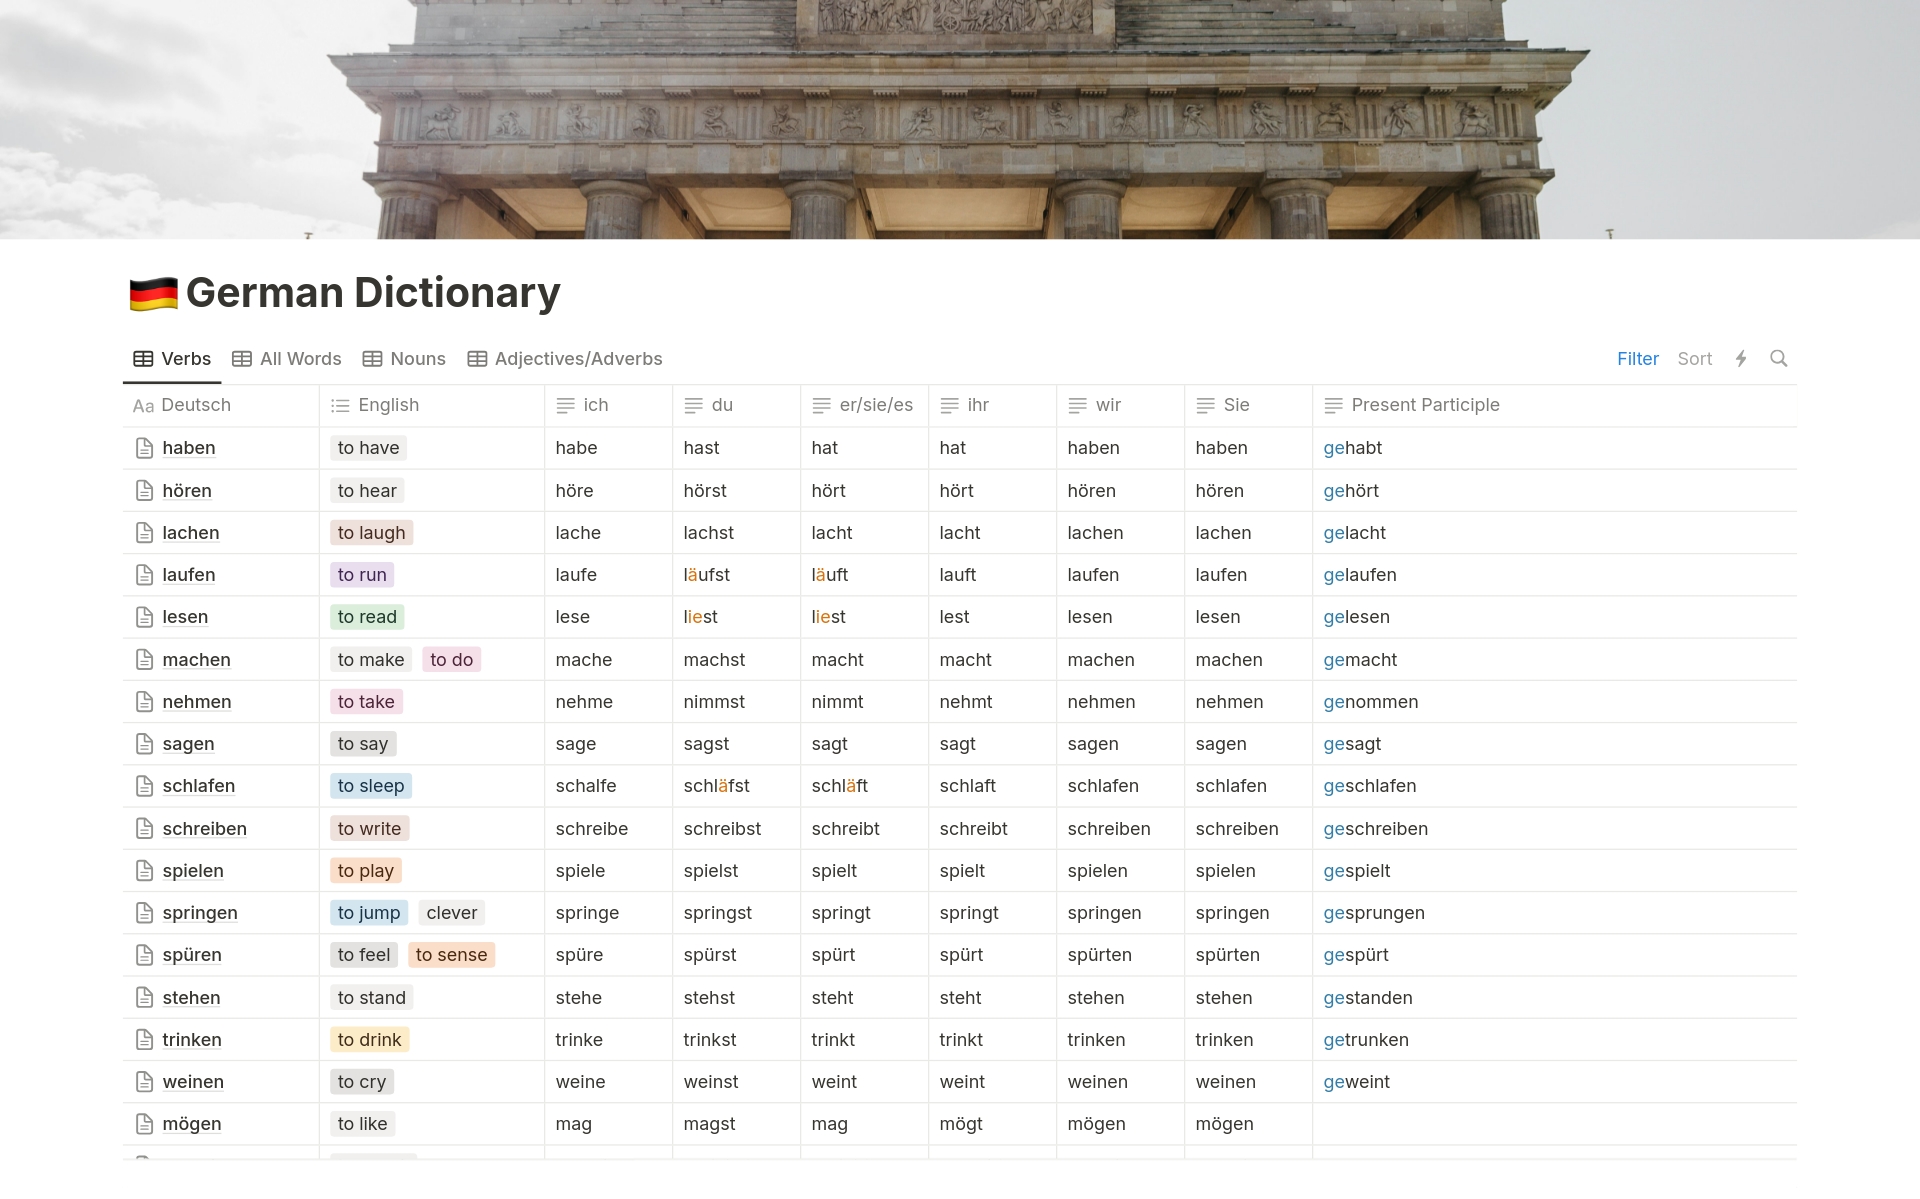 A German Language learning assistant to help you track your learning progress. The template promotes your learning and practice by enabling you to; 
Create a comprehensive dictionary of all words you learn, 
Conjugate verbs
Document plurals.
Explore words by parts of speech.